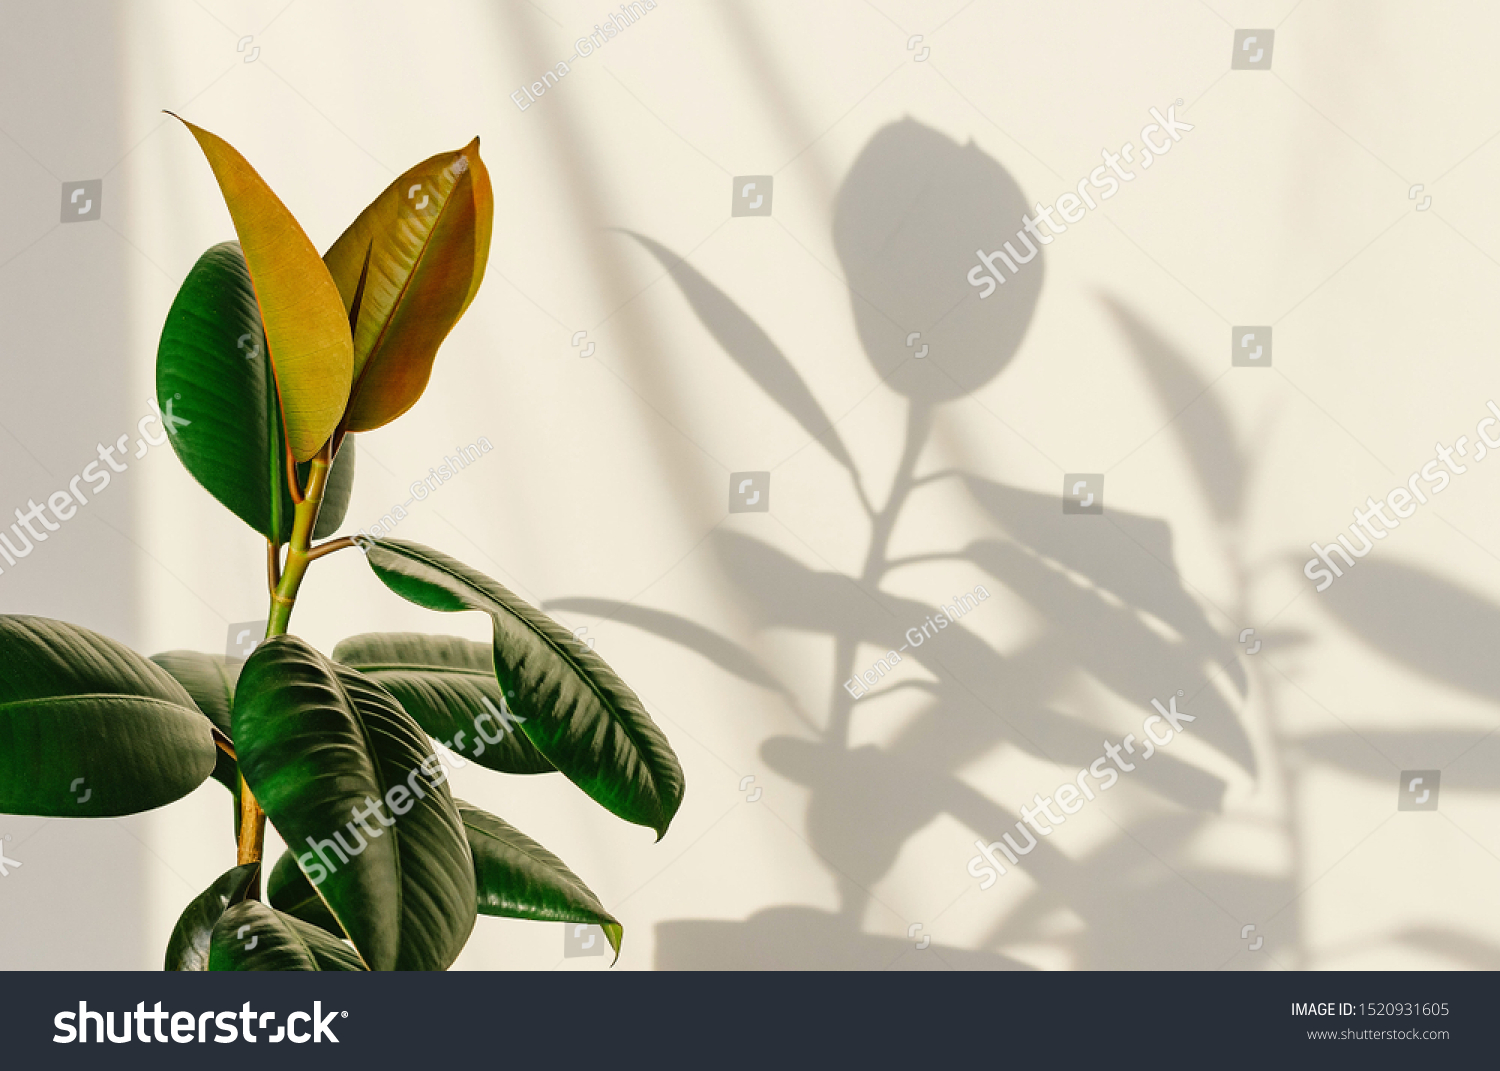 Ficus elastic plant rubber tree on a light background. Shadow of focus on the wall. Close up. #1520931605